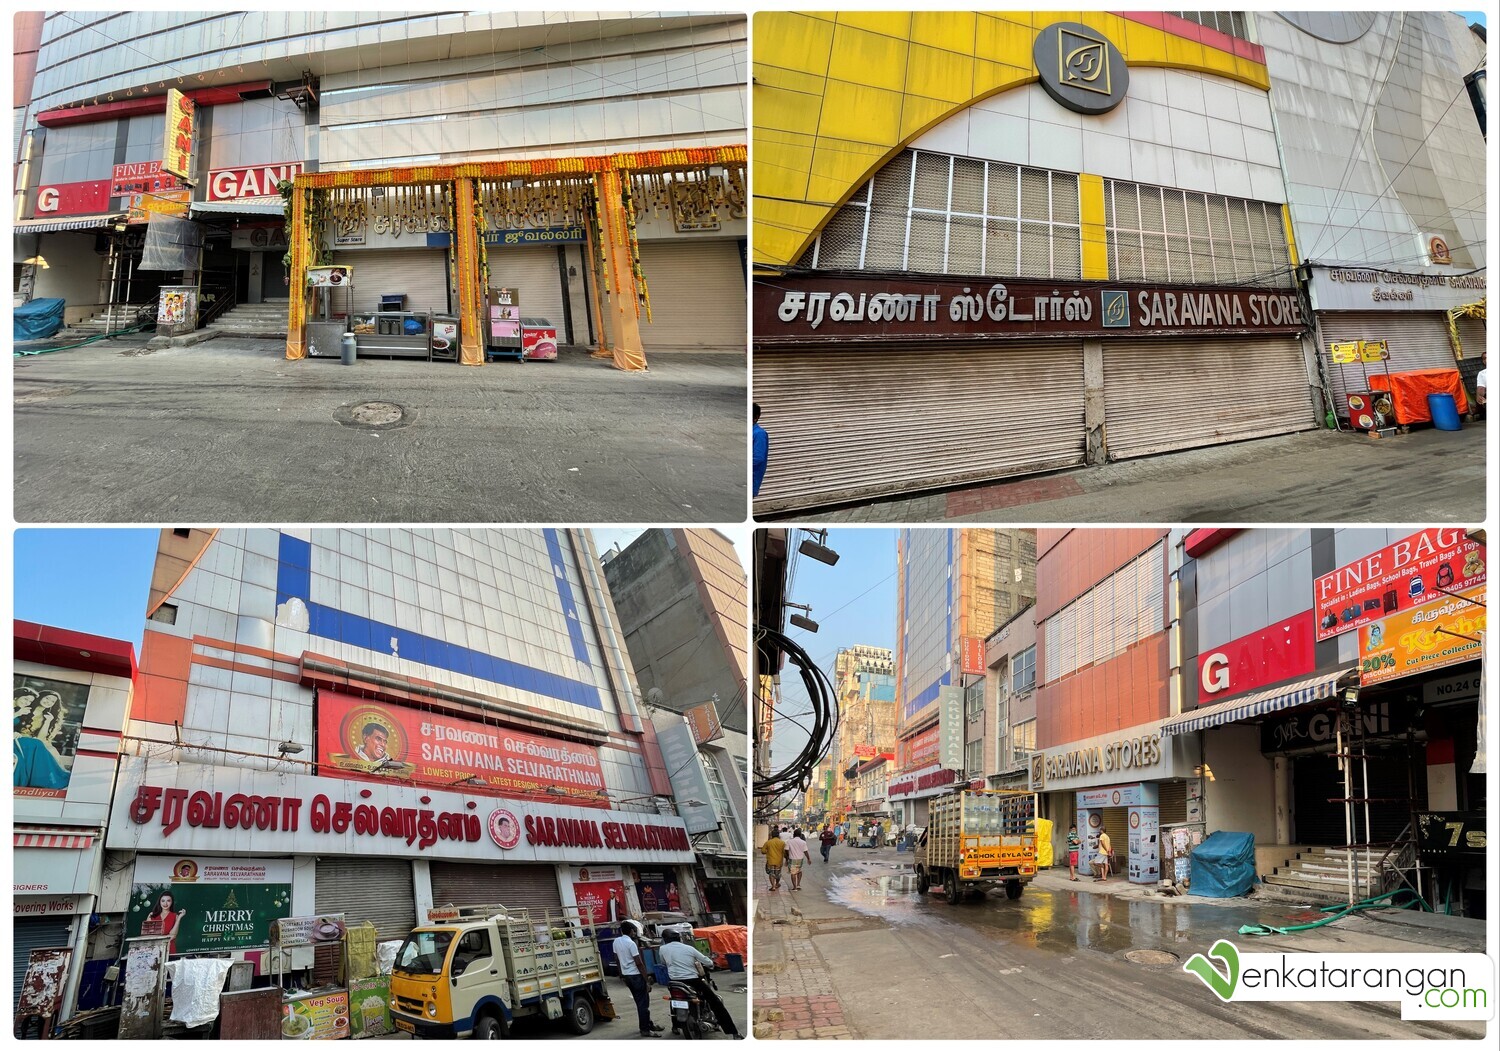 A few of the Saravana Stores Brother's shops - earlier they were owned by a single group 